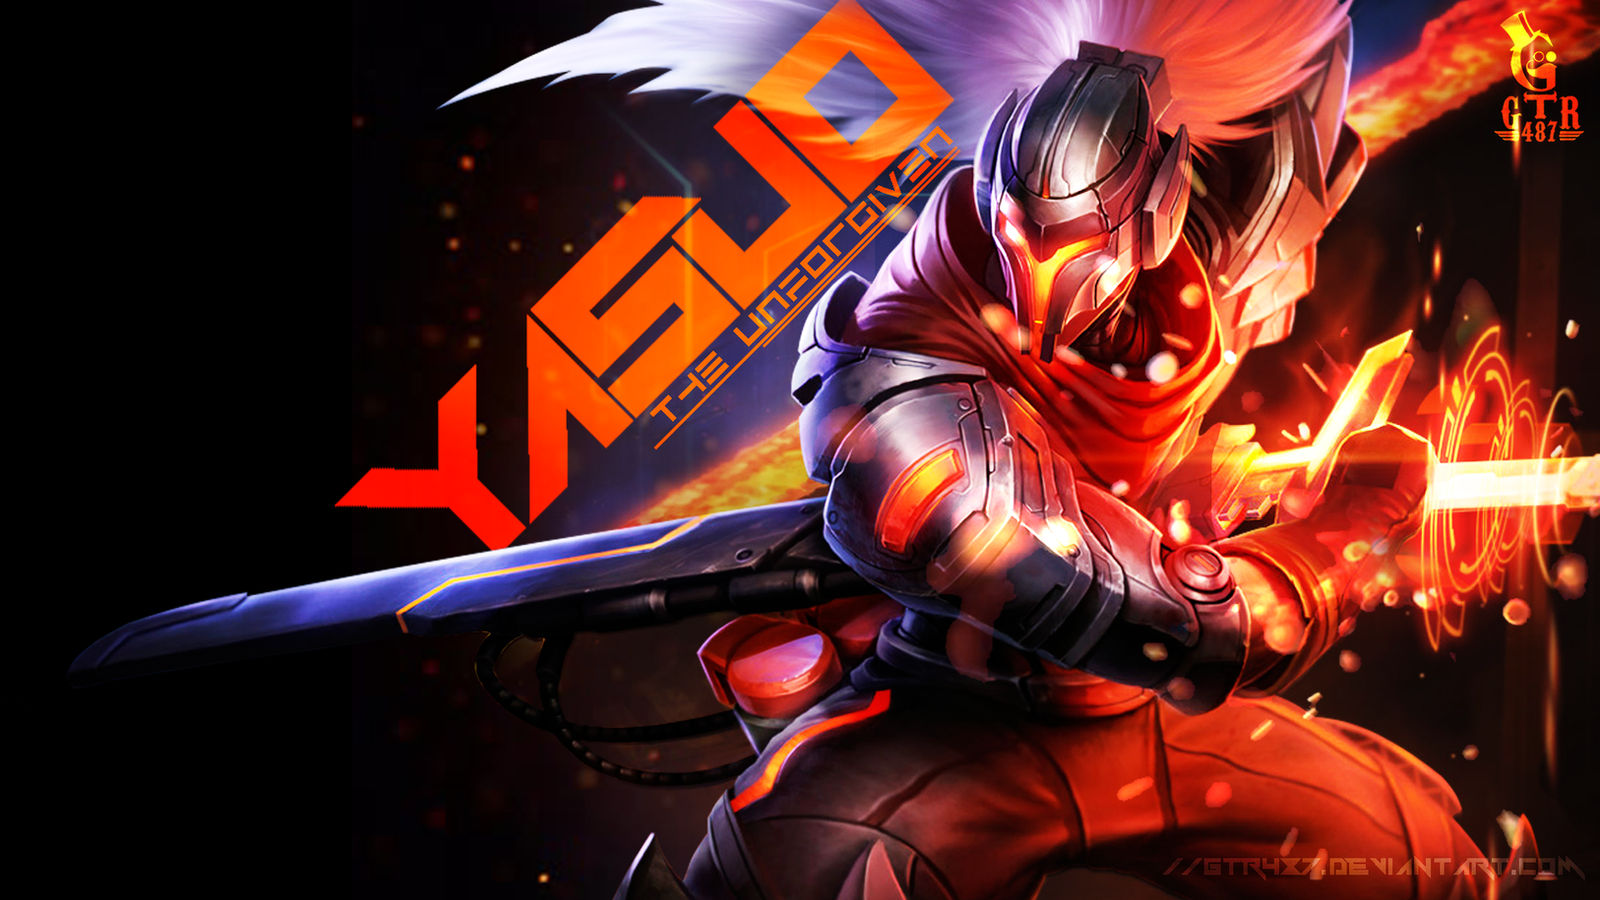 PROJECT YASUO WALLPAPER by GTR487